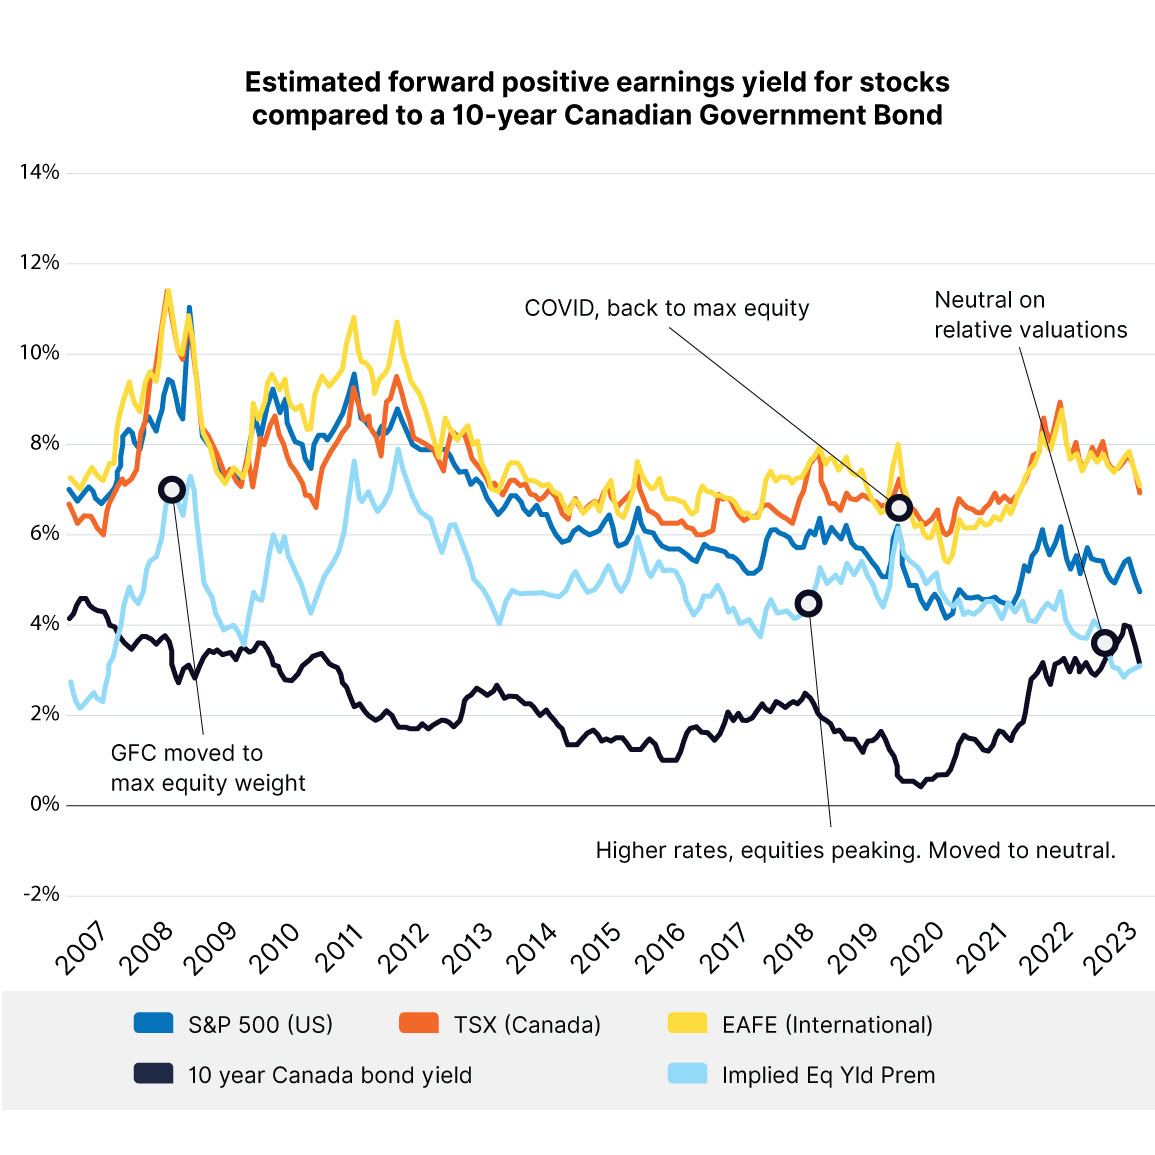 Estimated forward positive earnings yield for stocks compared to a 10 year Canadian government bond